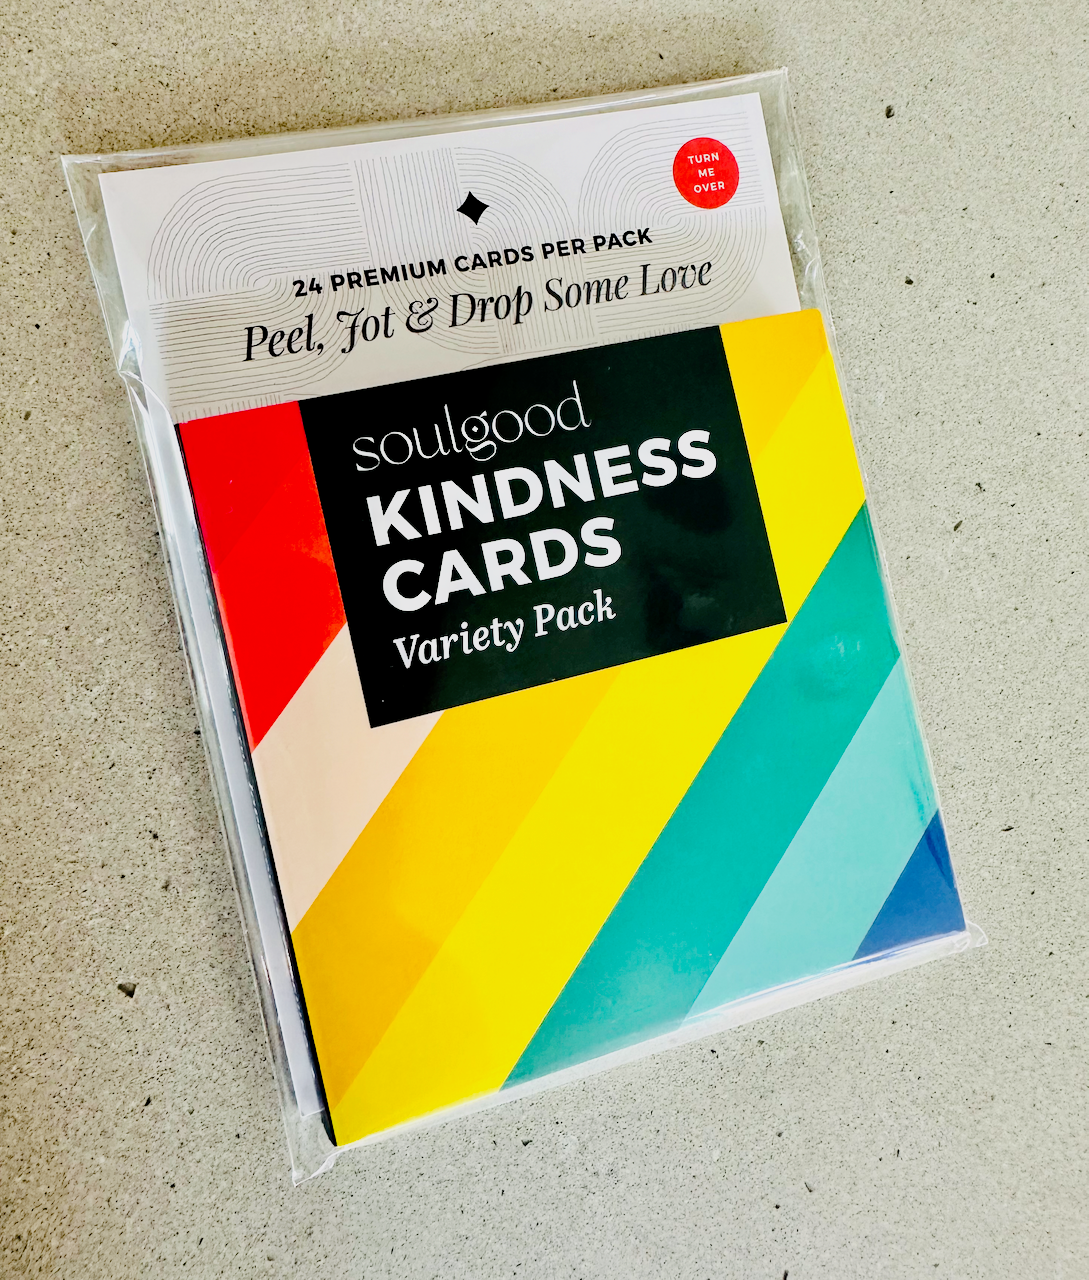 Bestselling Kindness Cards